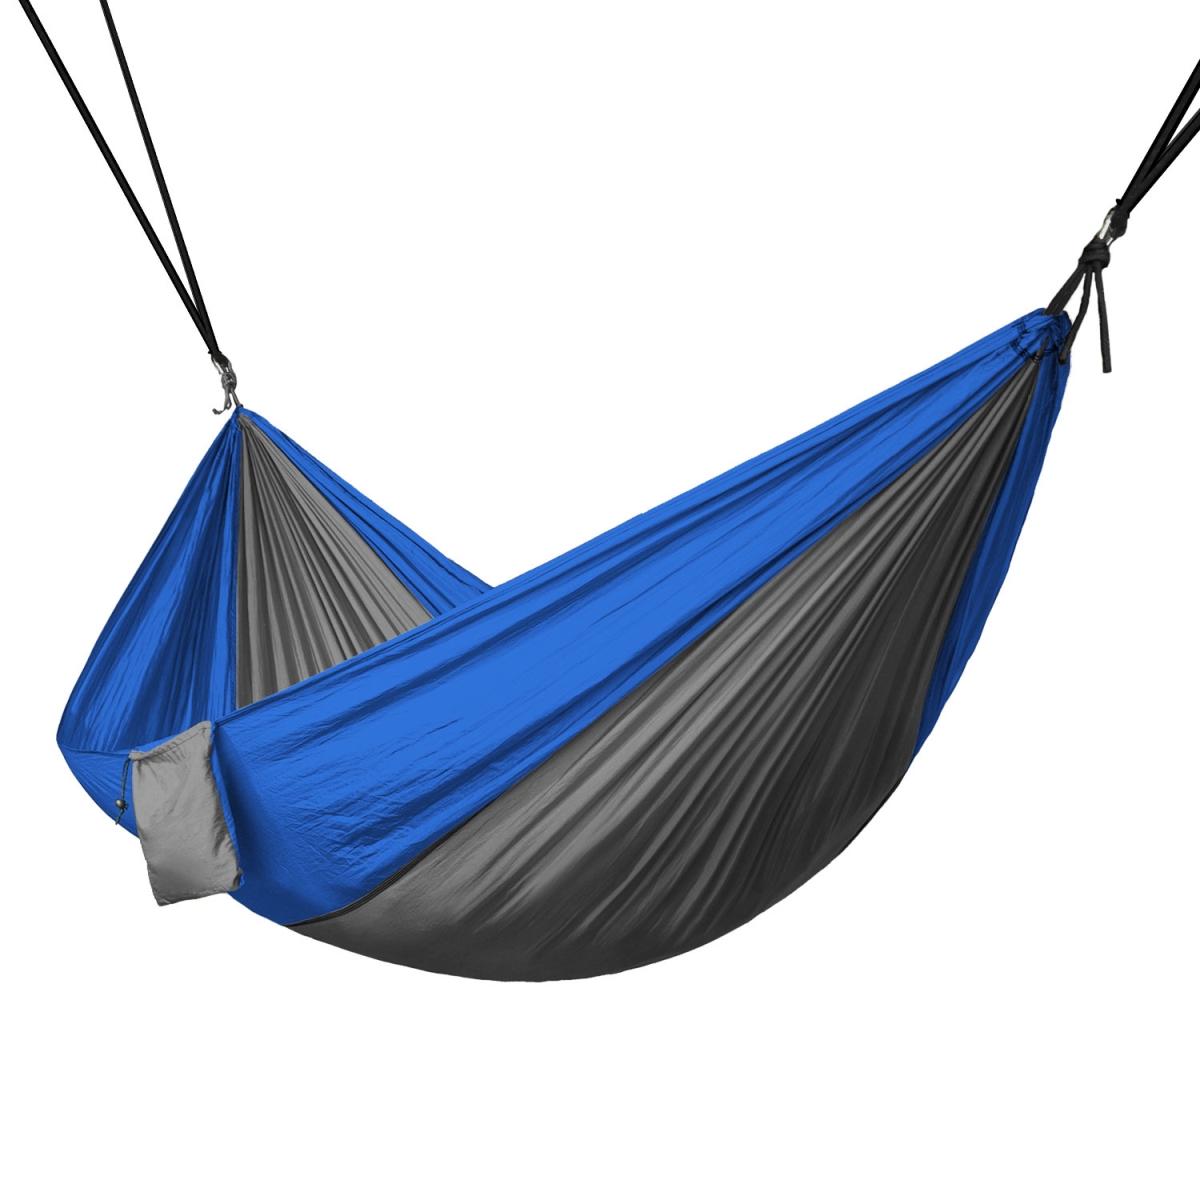 Ham-005 Portable 2 Person Hammock Rope Hanging Swing Fabric Camping Bed - Grey & Blue